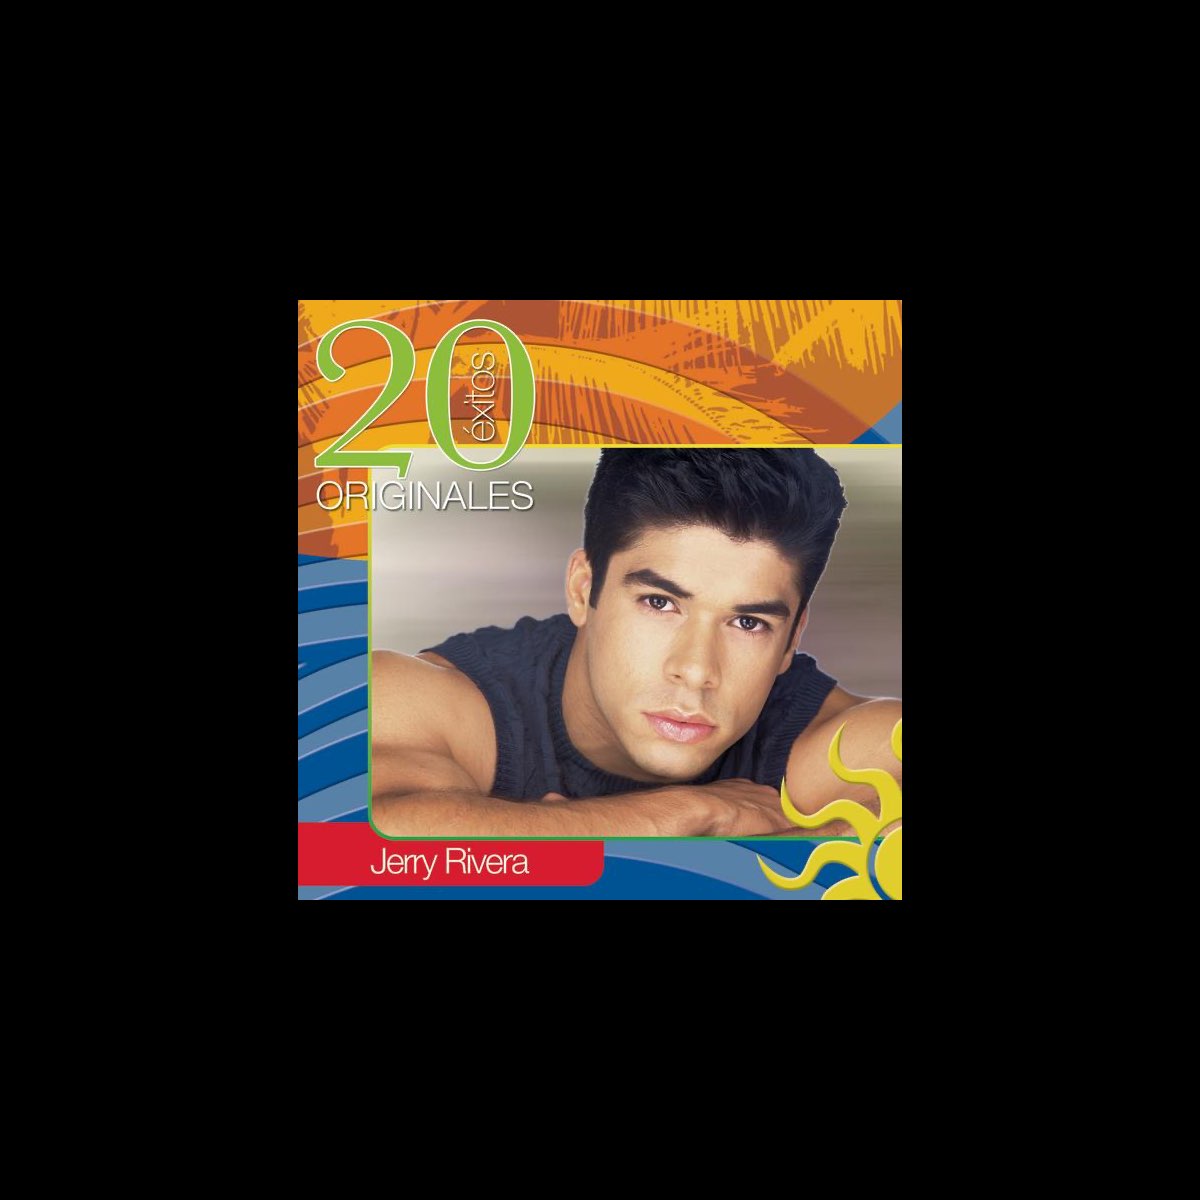 20 Éxitos Originales by Jerry Rivera on Apple Music